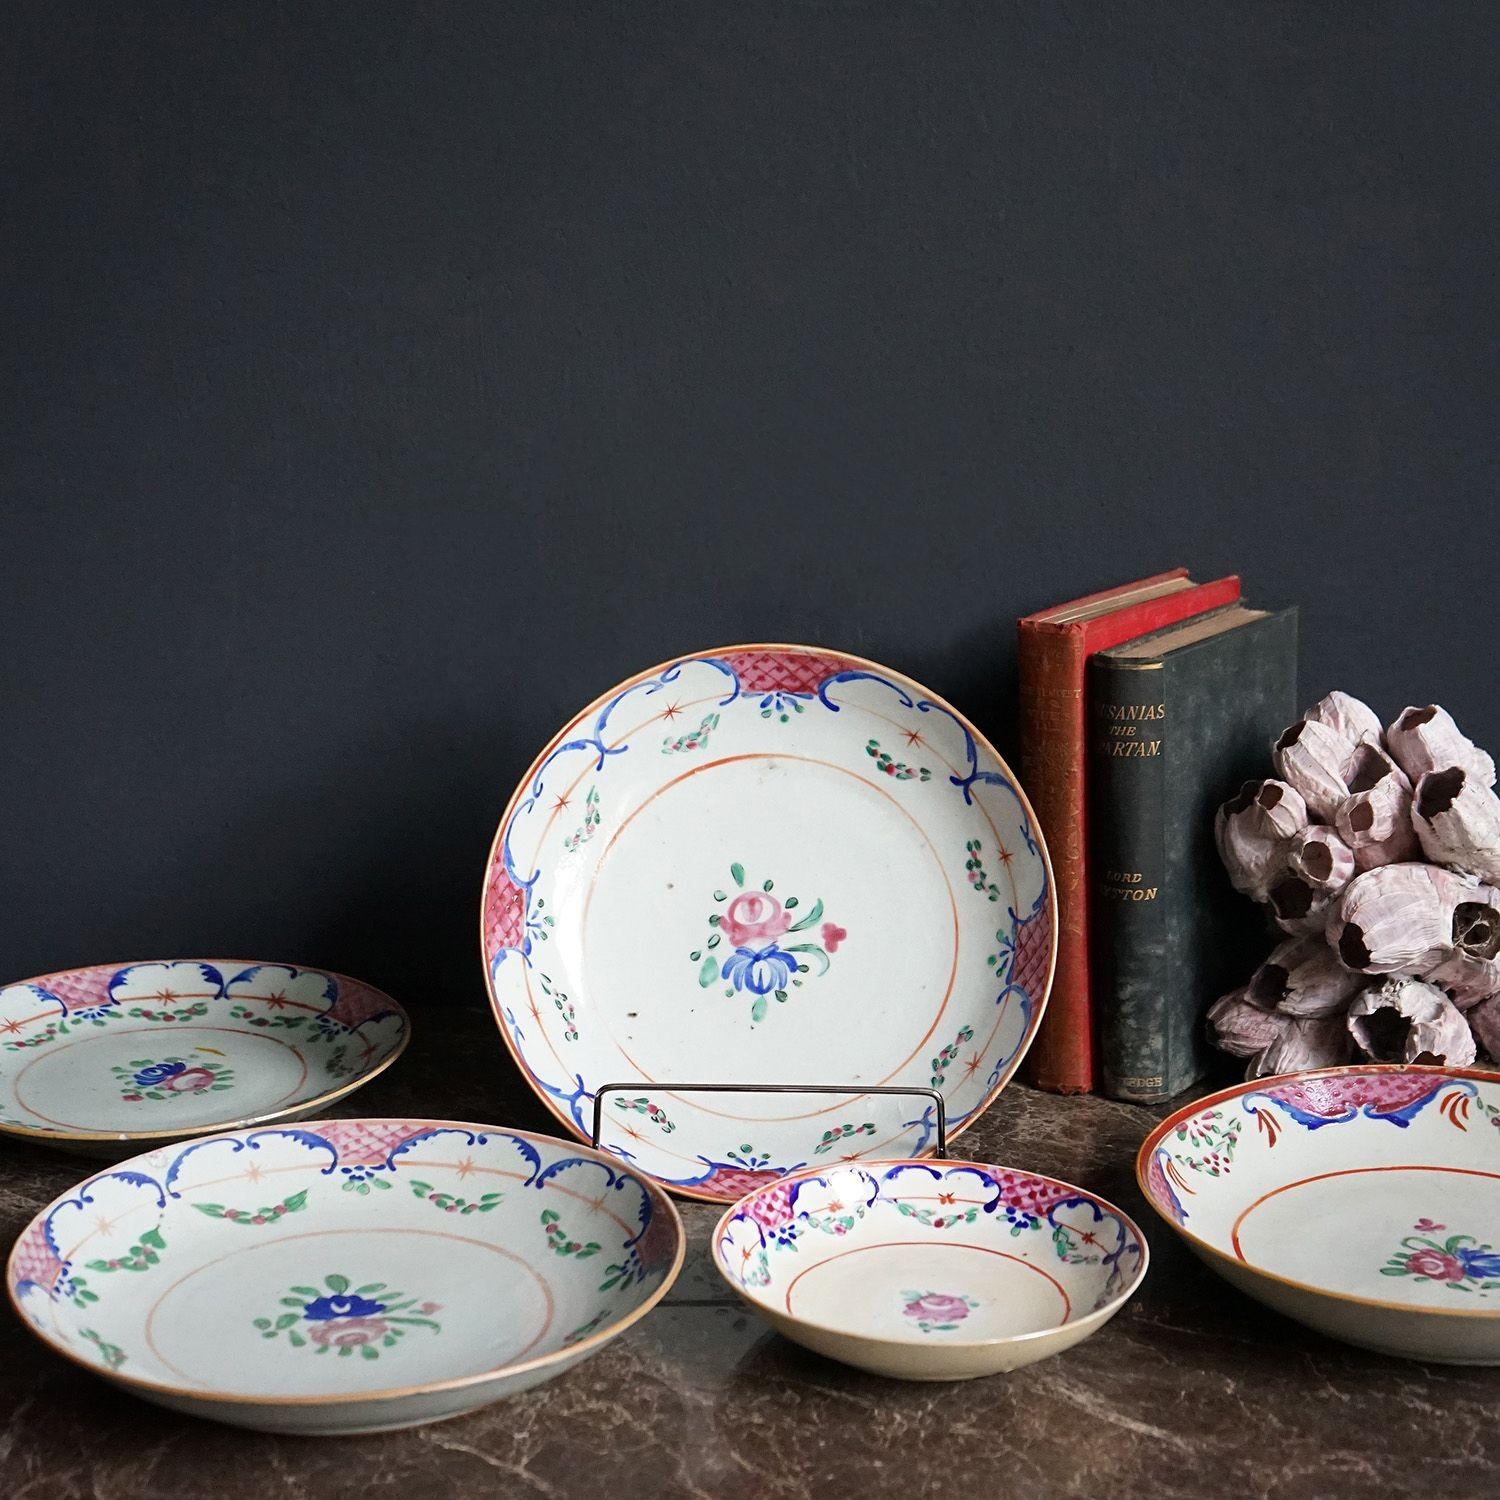 Collection of Antique Chinese Export Porcelain Bowls, Early 19th Century For Sale 2